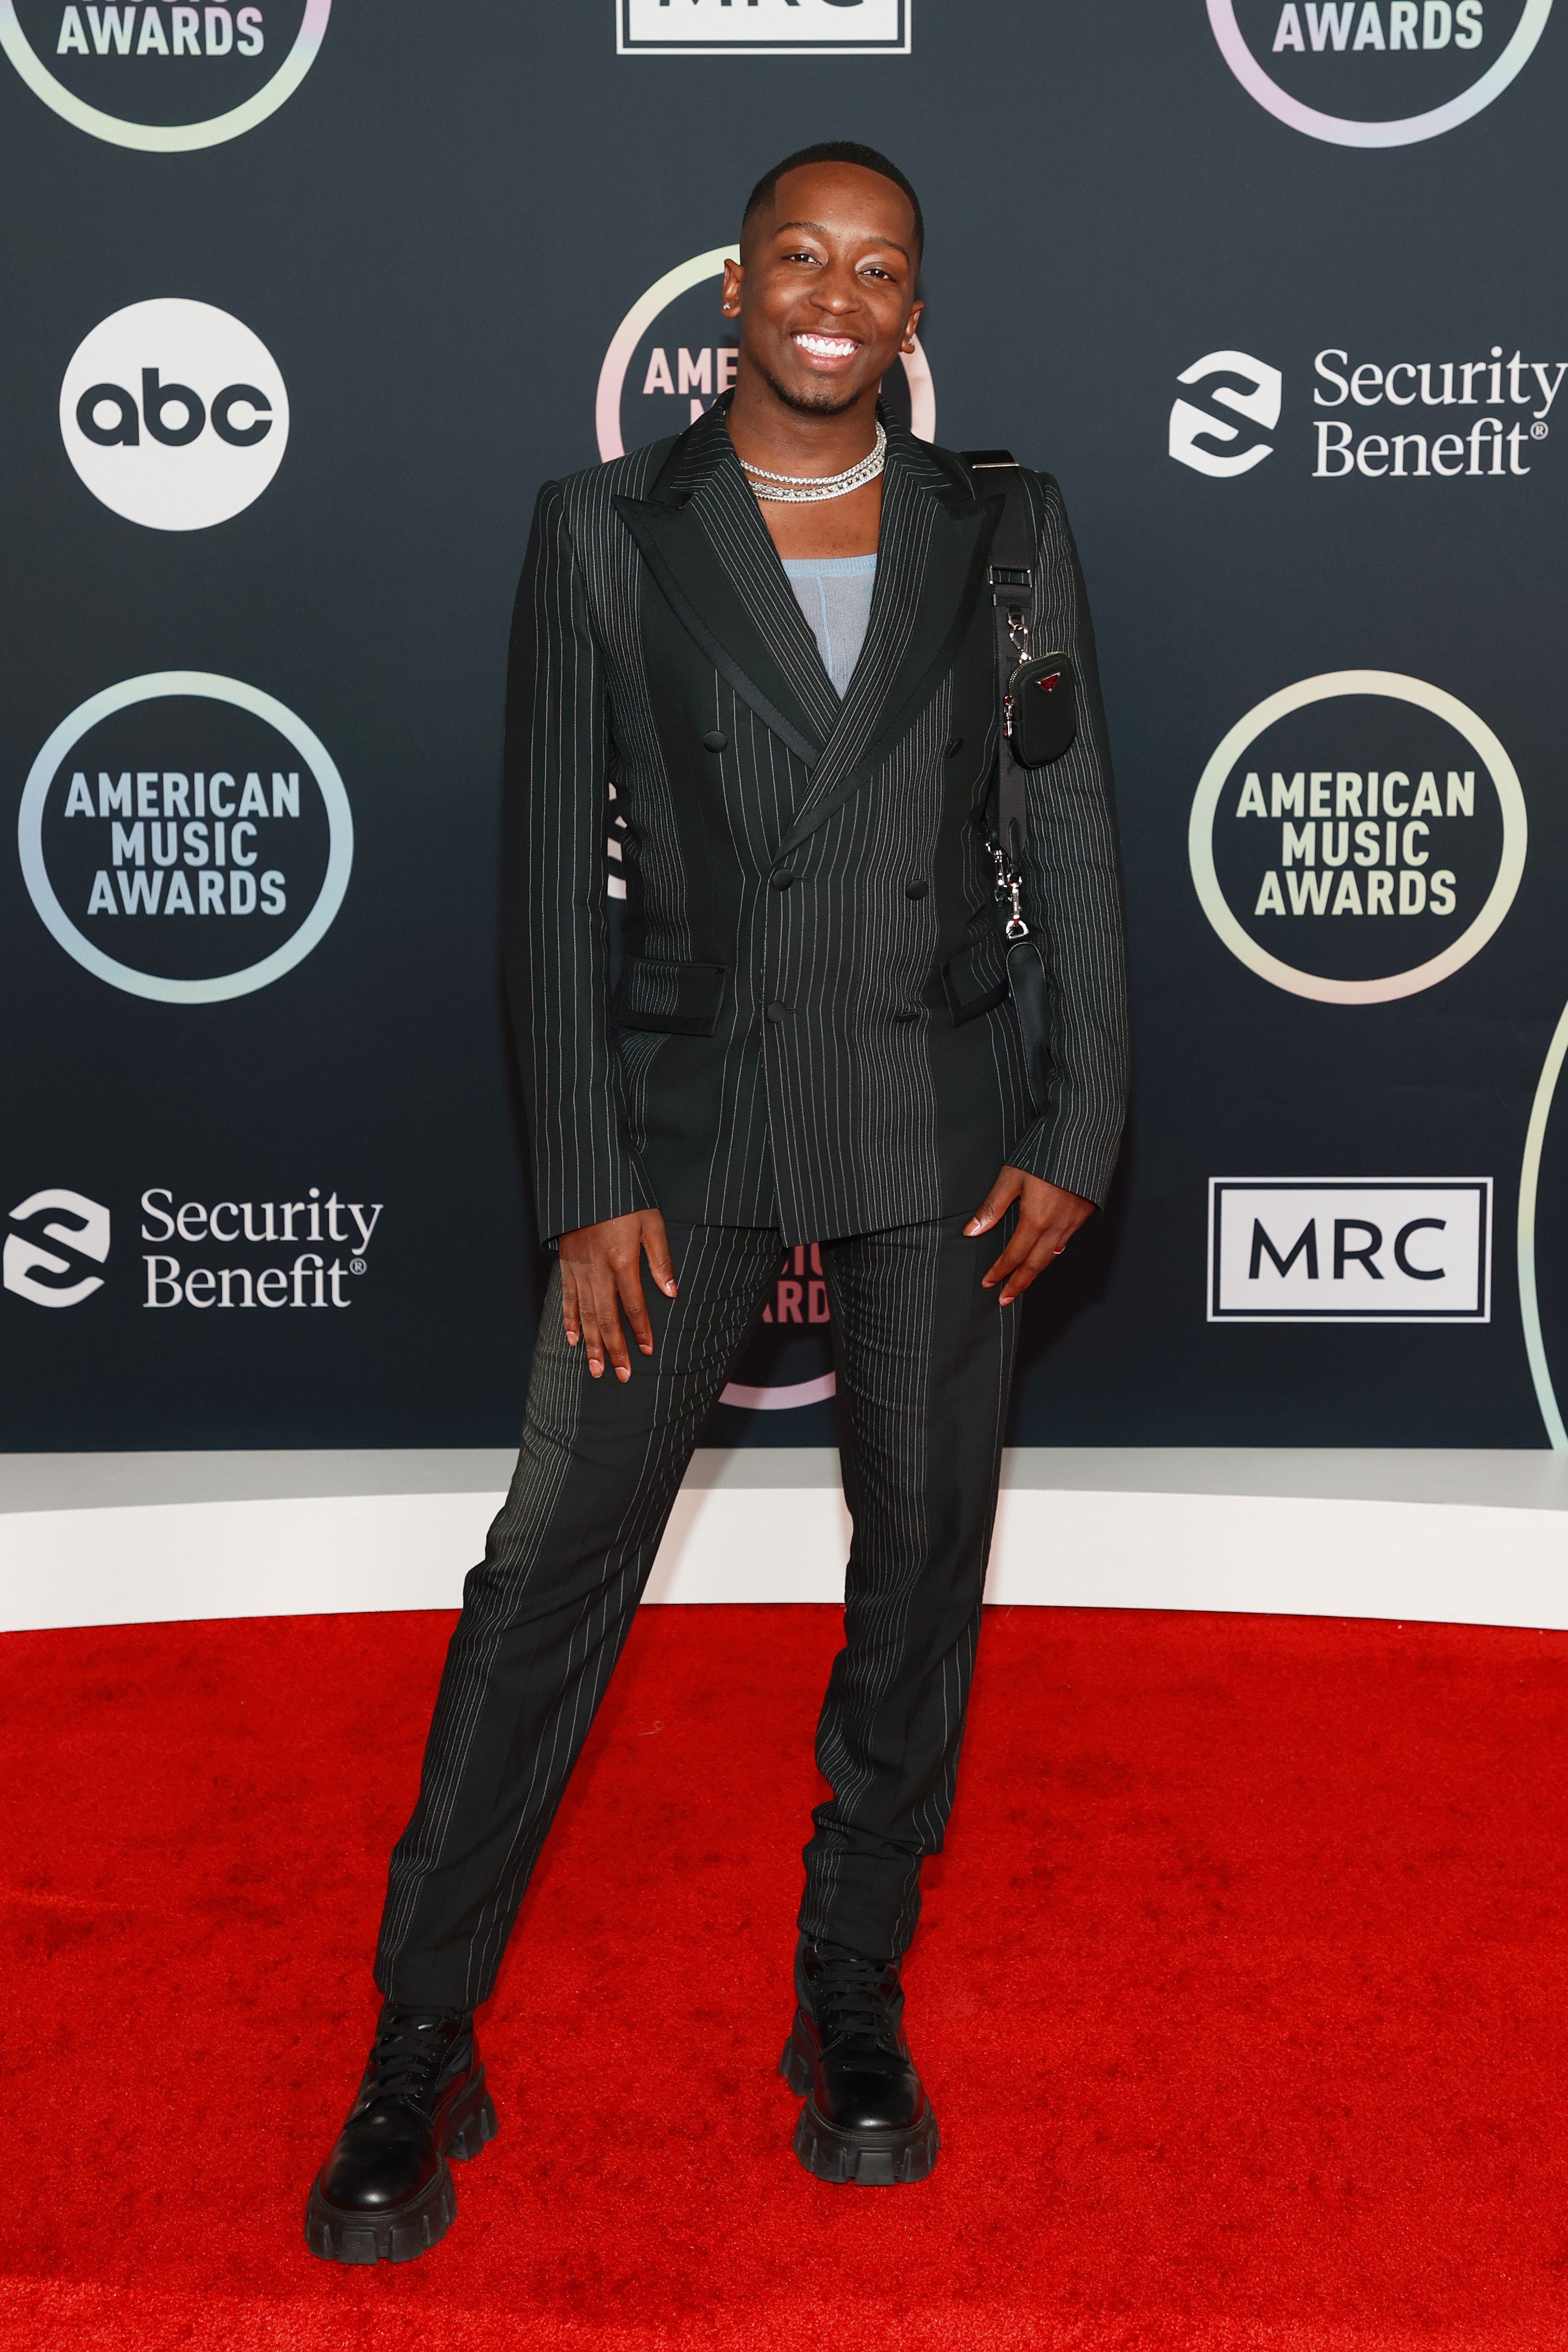 Markell Washington wears a double-breasted suit on the red carpet